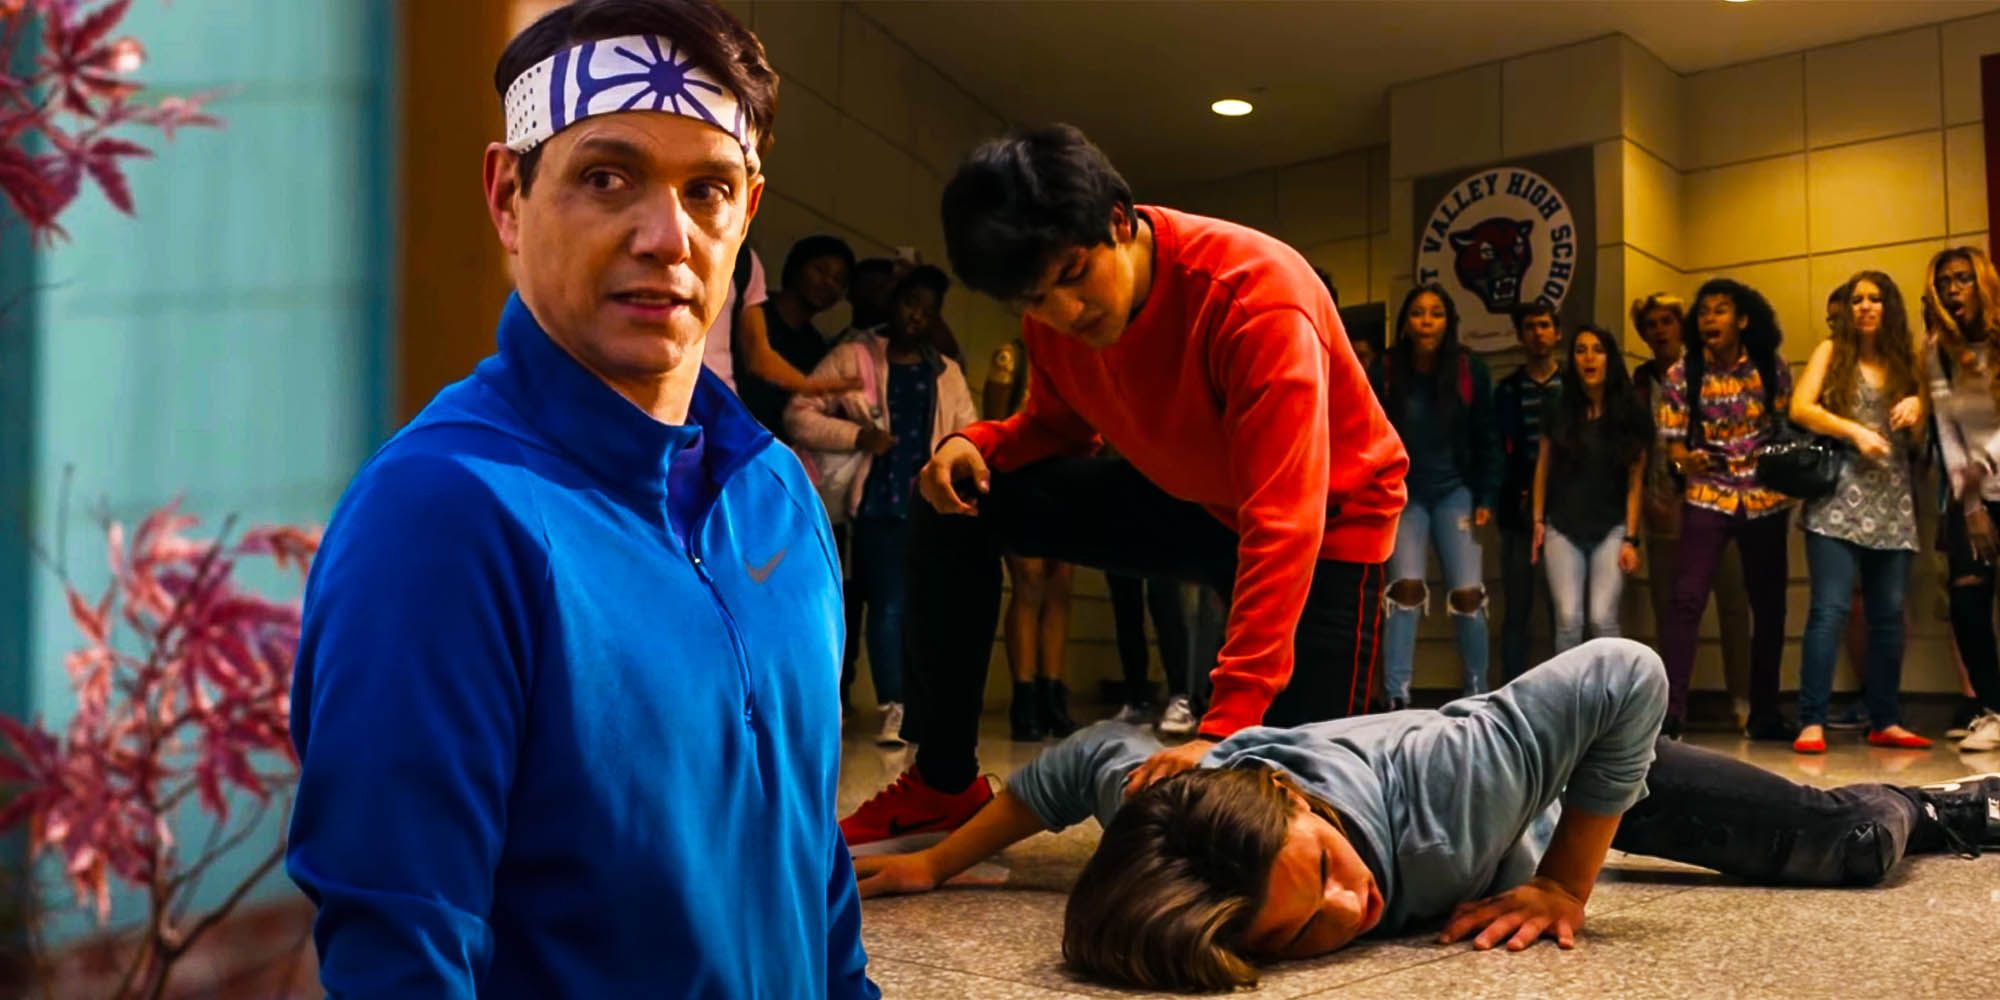 Cobra kai season 4 will end with another high school fight